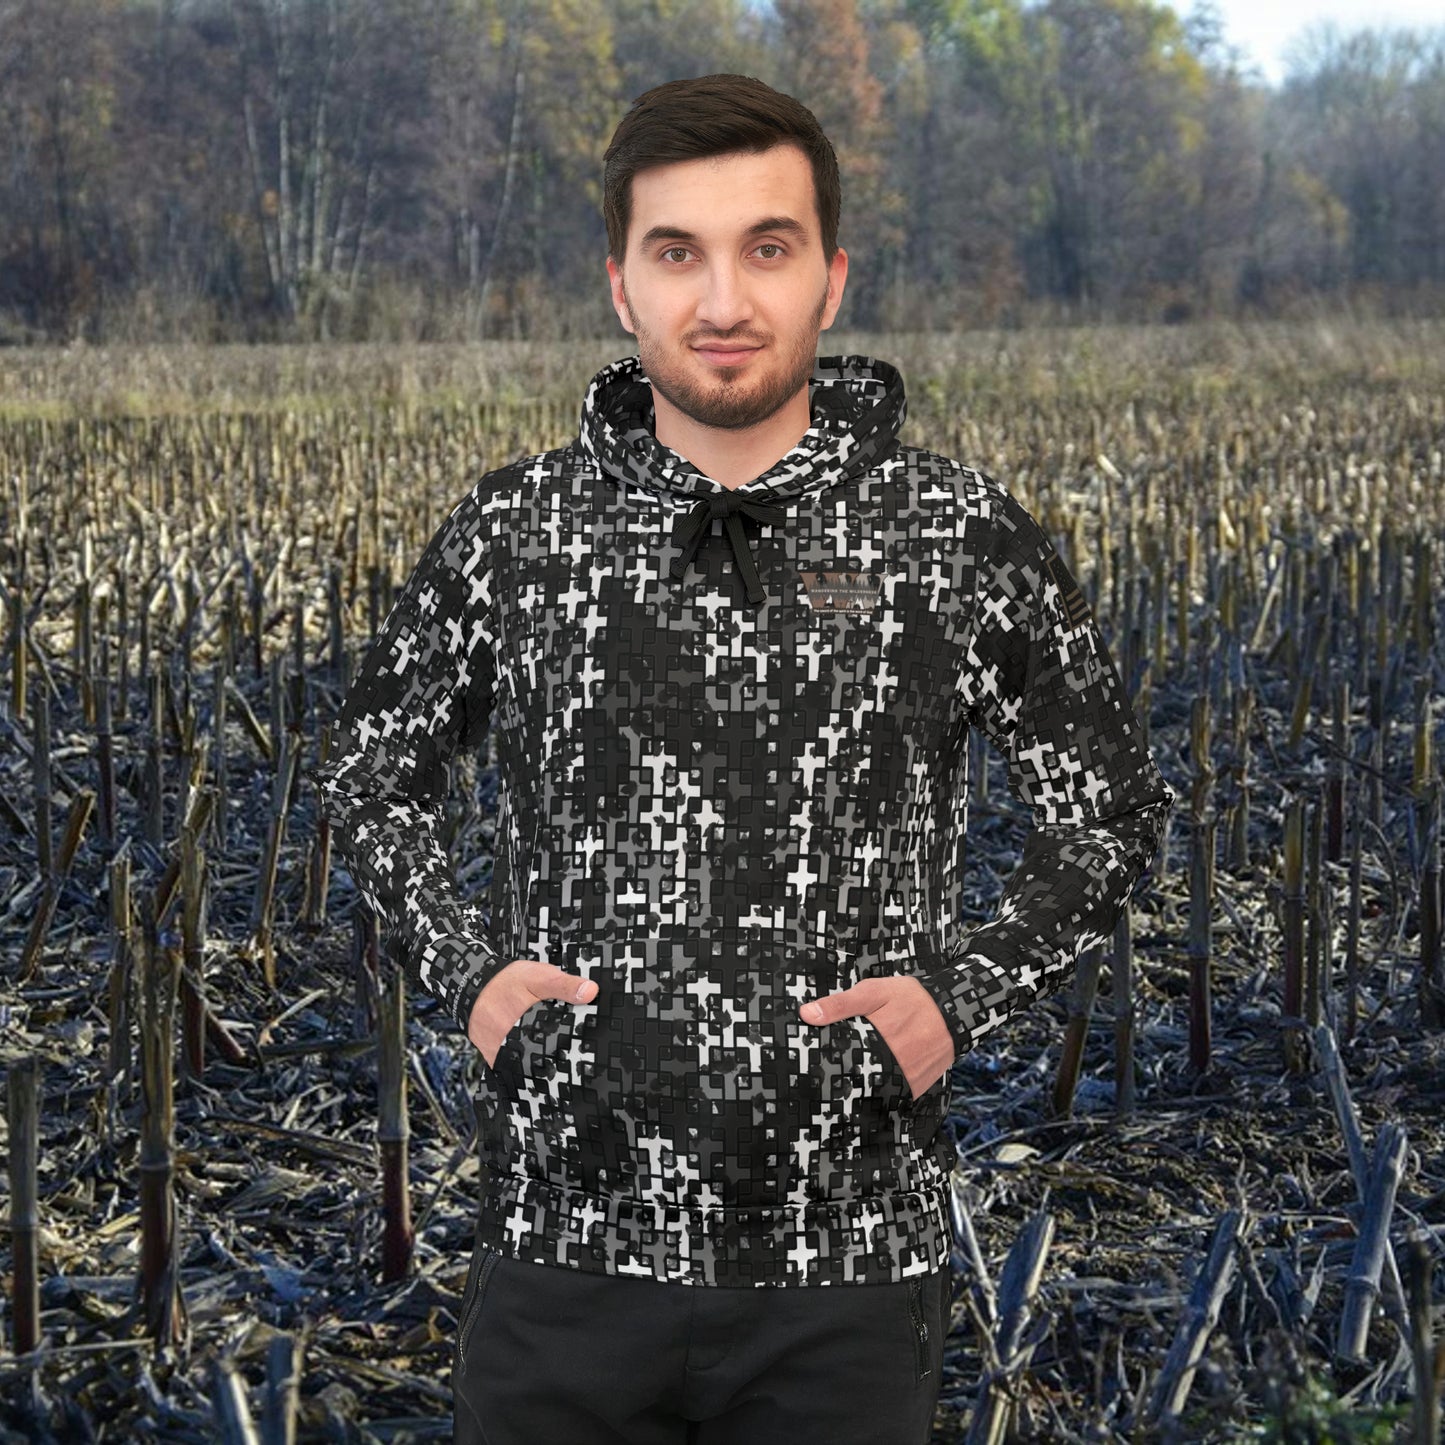 Wandering the Wilderness Urban cross camo unisex Athletic Hoodie. These tend to run small so we recommend ordering one size larger than you normally wear, also these are made on demand and can take two weeks or longer to be delivered.